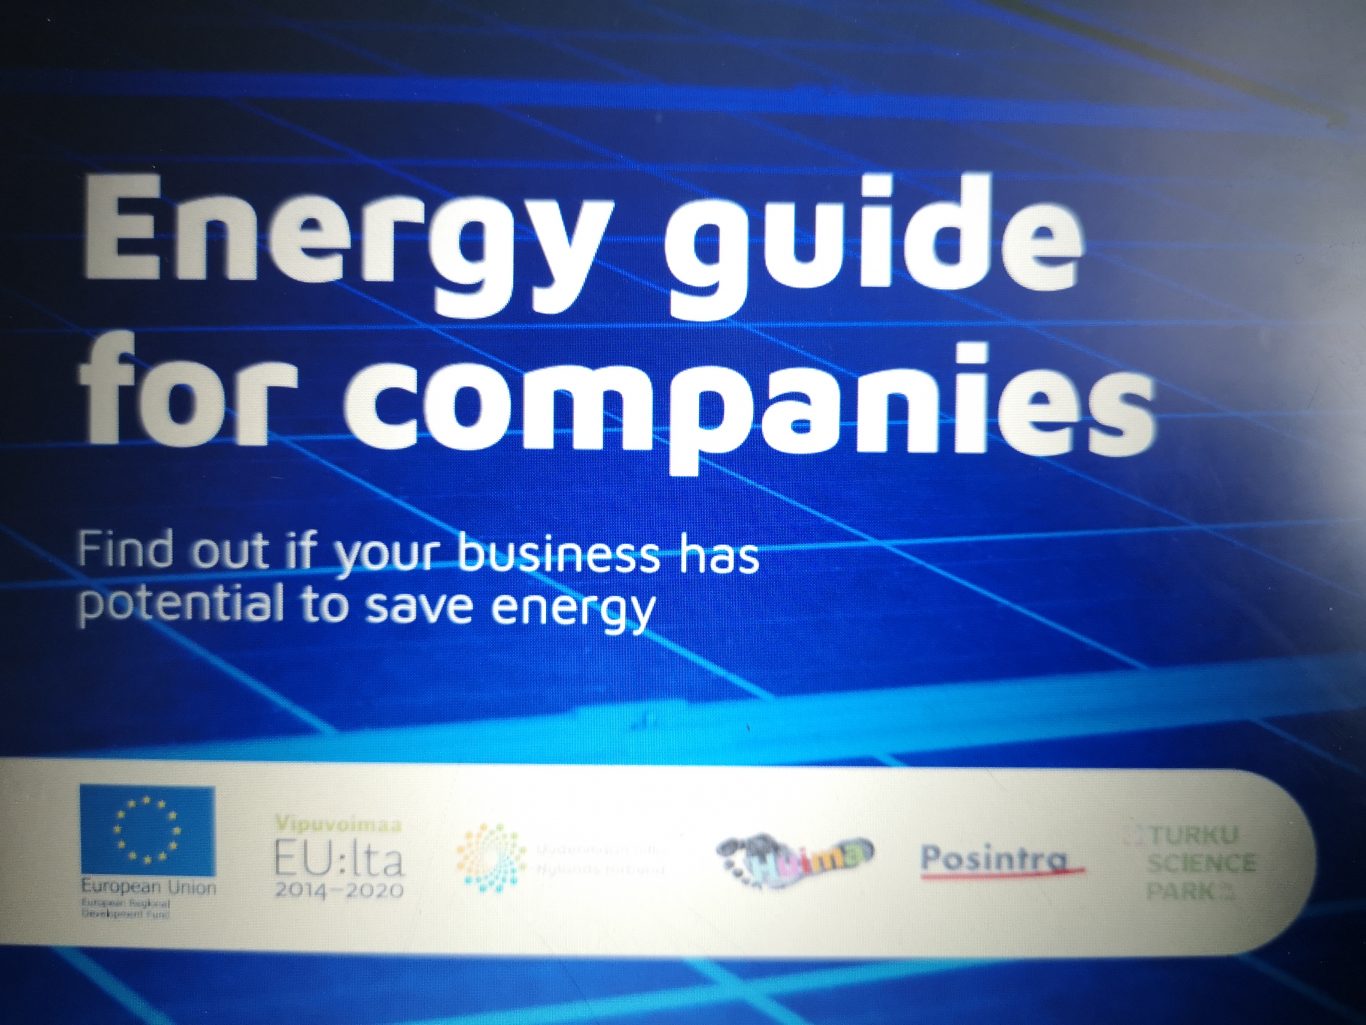 Energy guide for companies